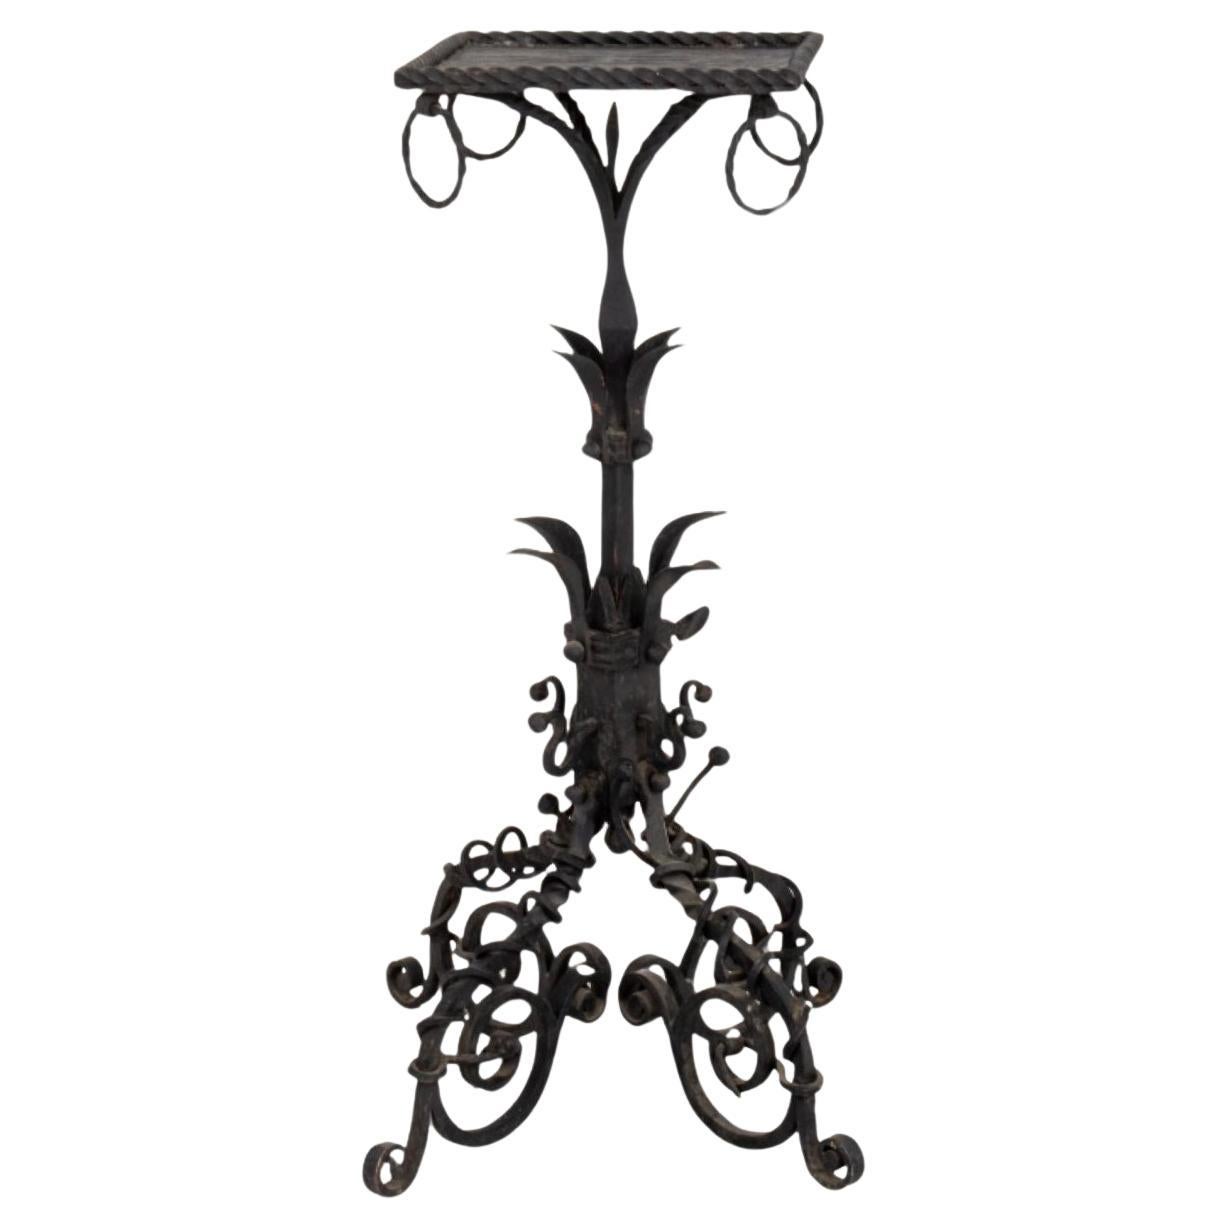 Cast Iron Garden Plant Stand Table For Sale